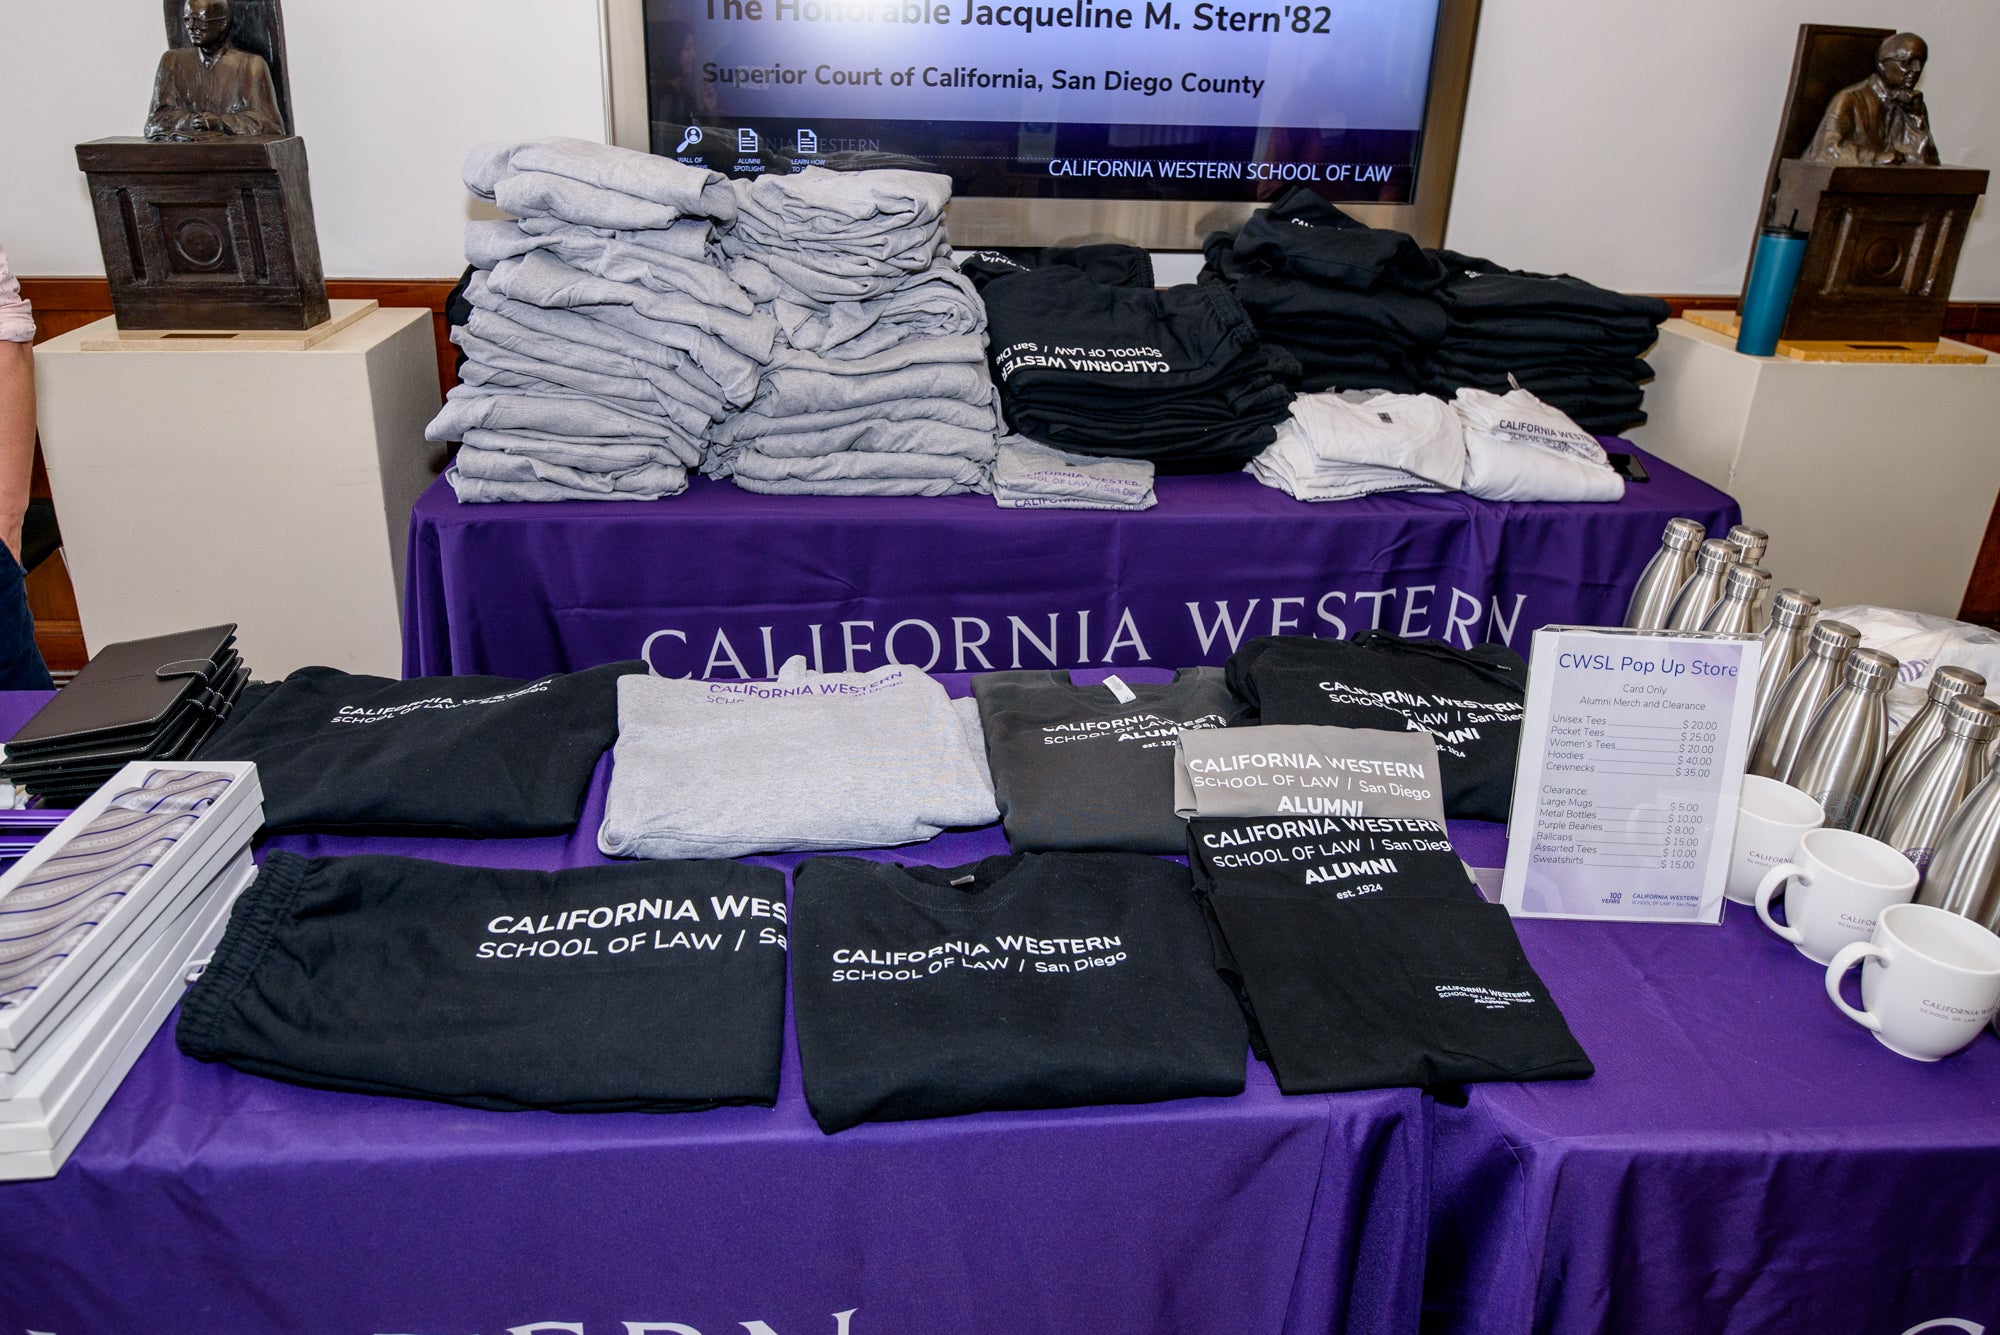 Tables with purple tablecloths featuring the CWSL logo are filled with California Western School of Law merchandise. From top left to bottom right, there are: piles of gray, black and white clothes, gray and purple scarves, black padfolios, black sweat pants, black sweatshirts and hoodies, gray hoodies, gray t shirts, a pricing sign, white mugs and stainless steel waterbottles. 